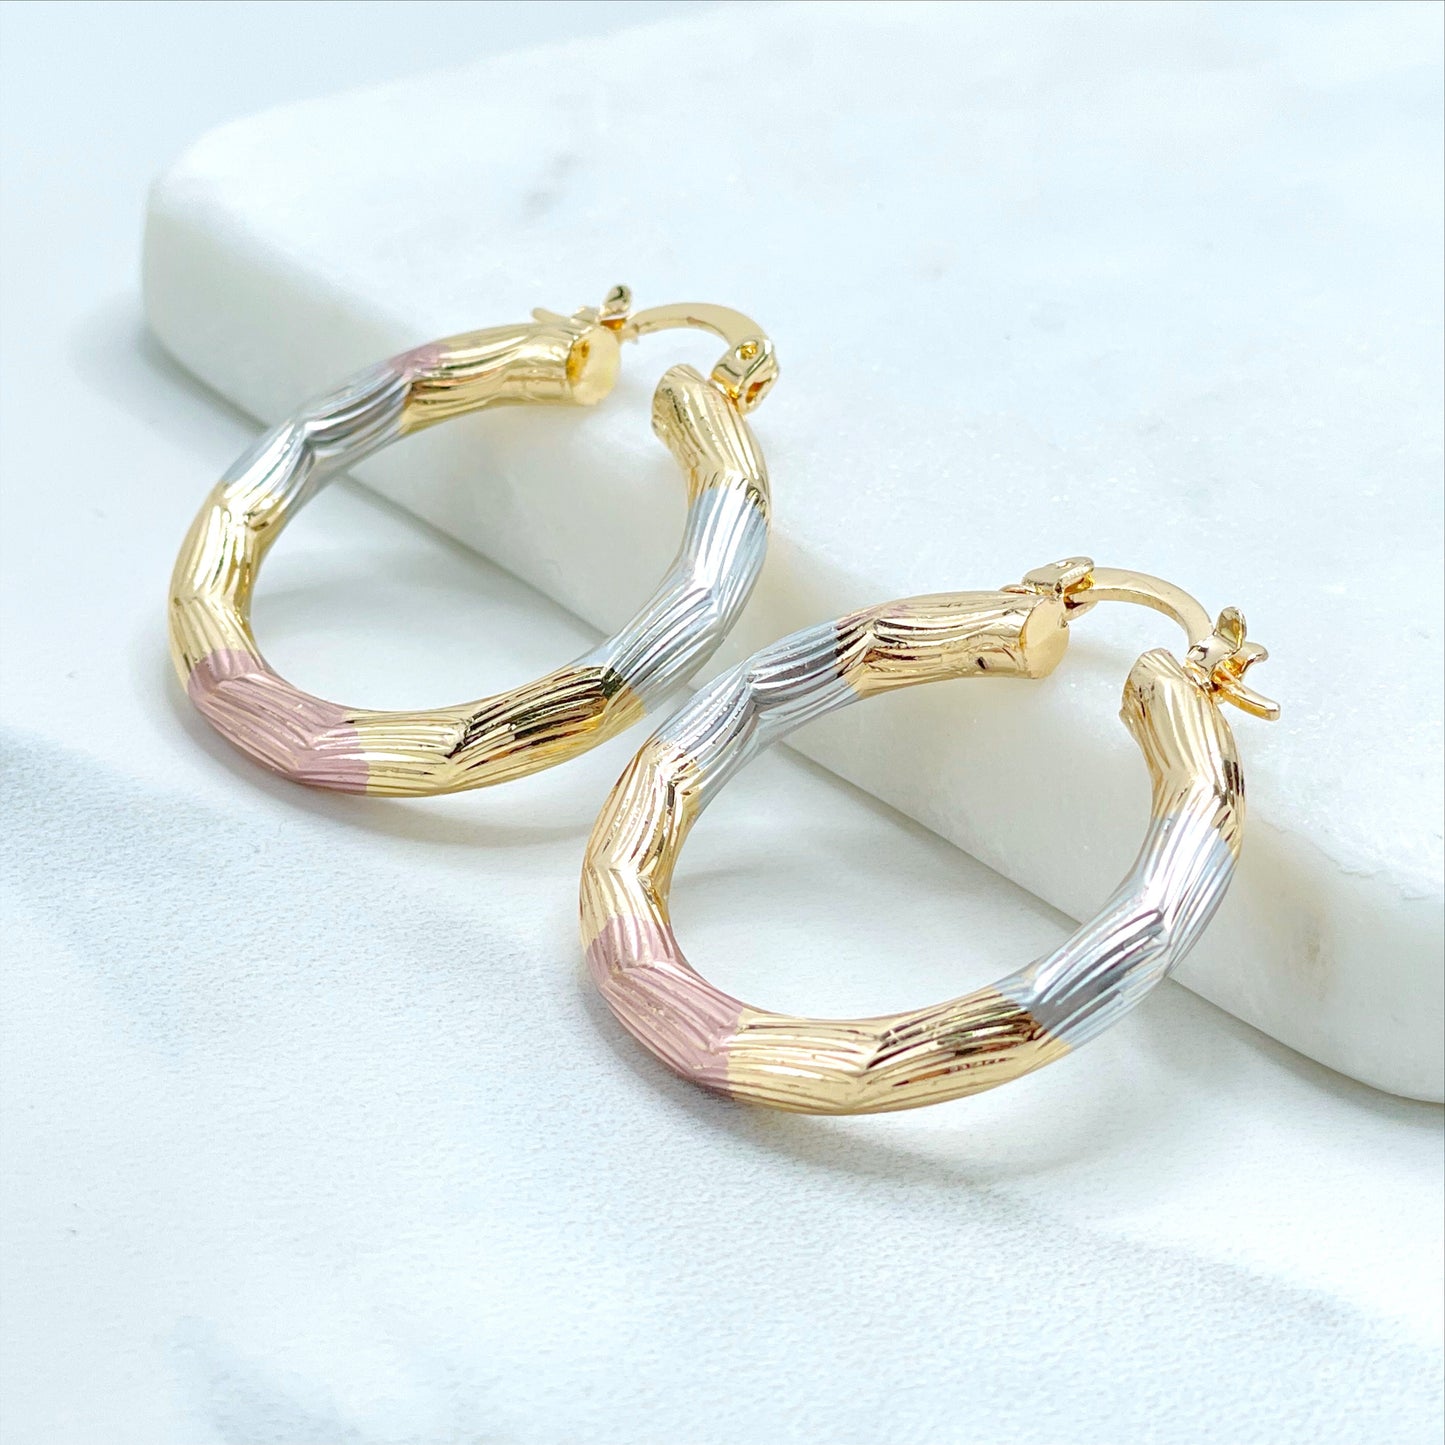 18k Gold Filled Three Tone, Tri Color 30mm Textured Hoop Earrings, 4mm Thickness Wholesale Jewelry Making Supplies